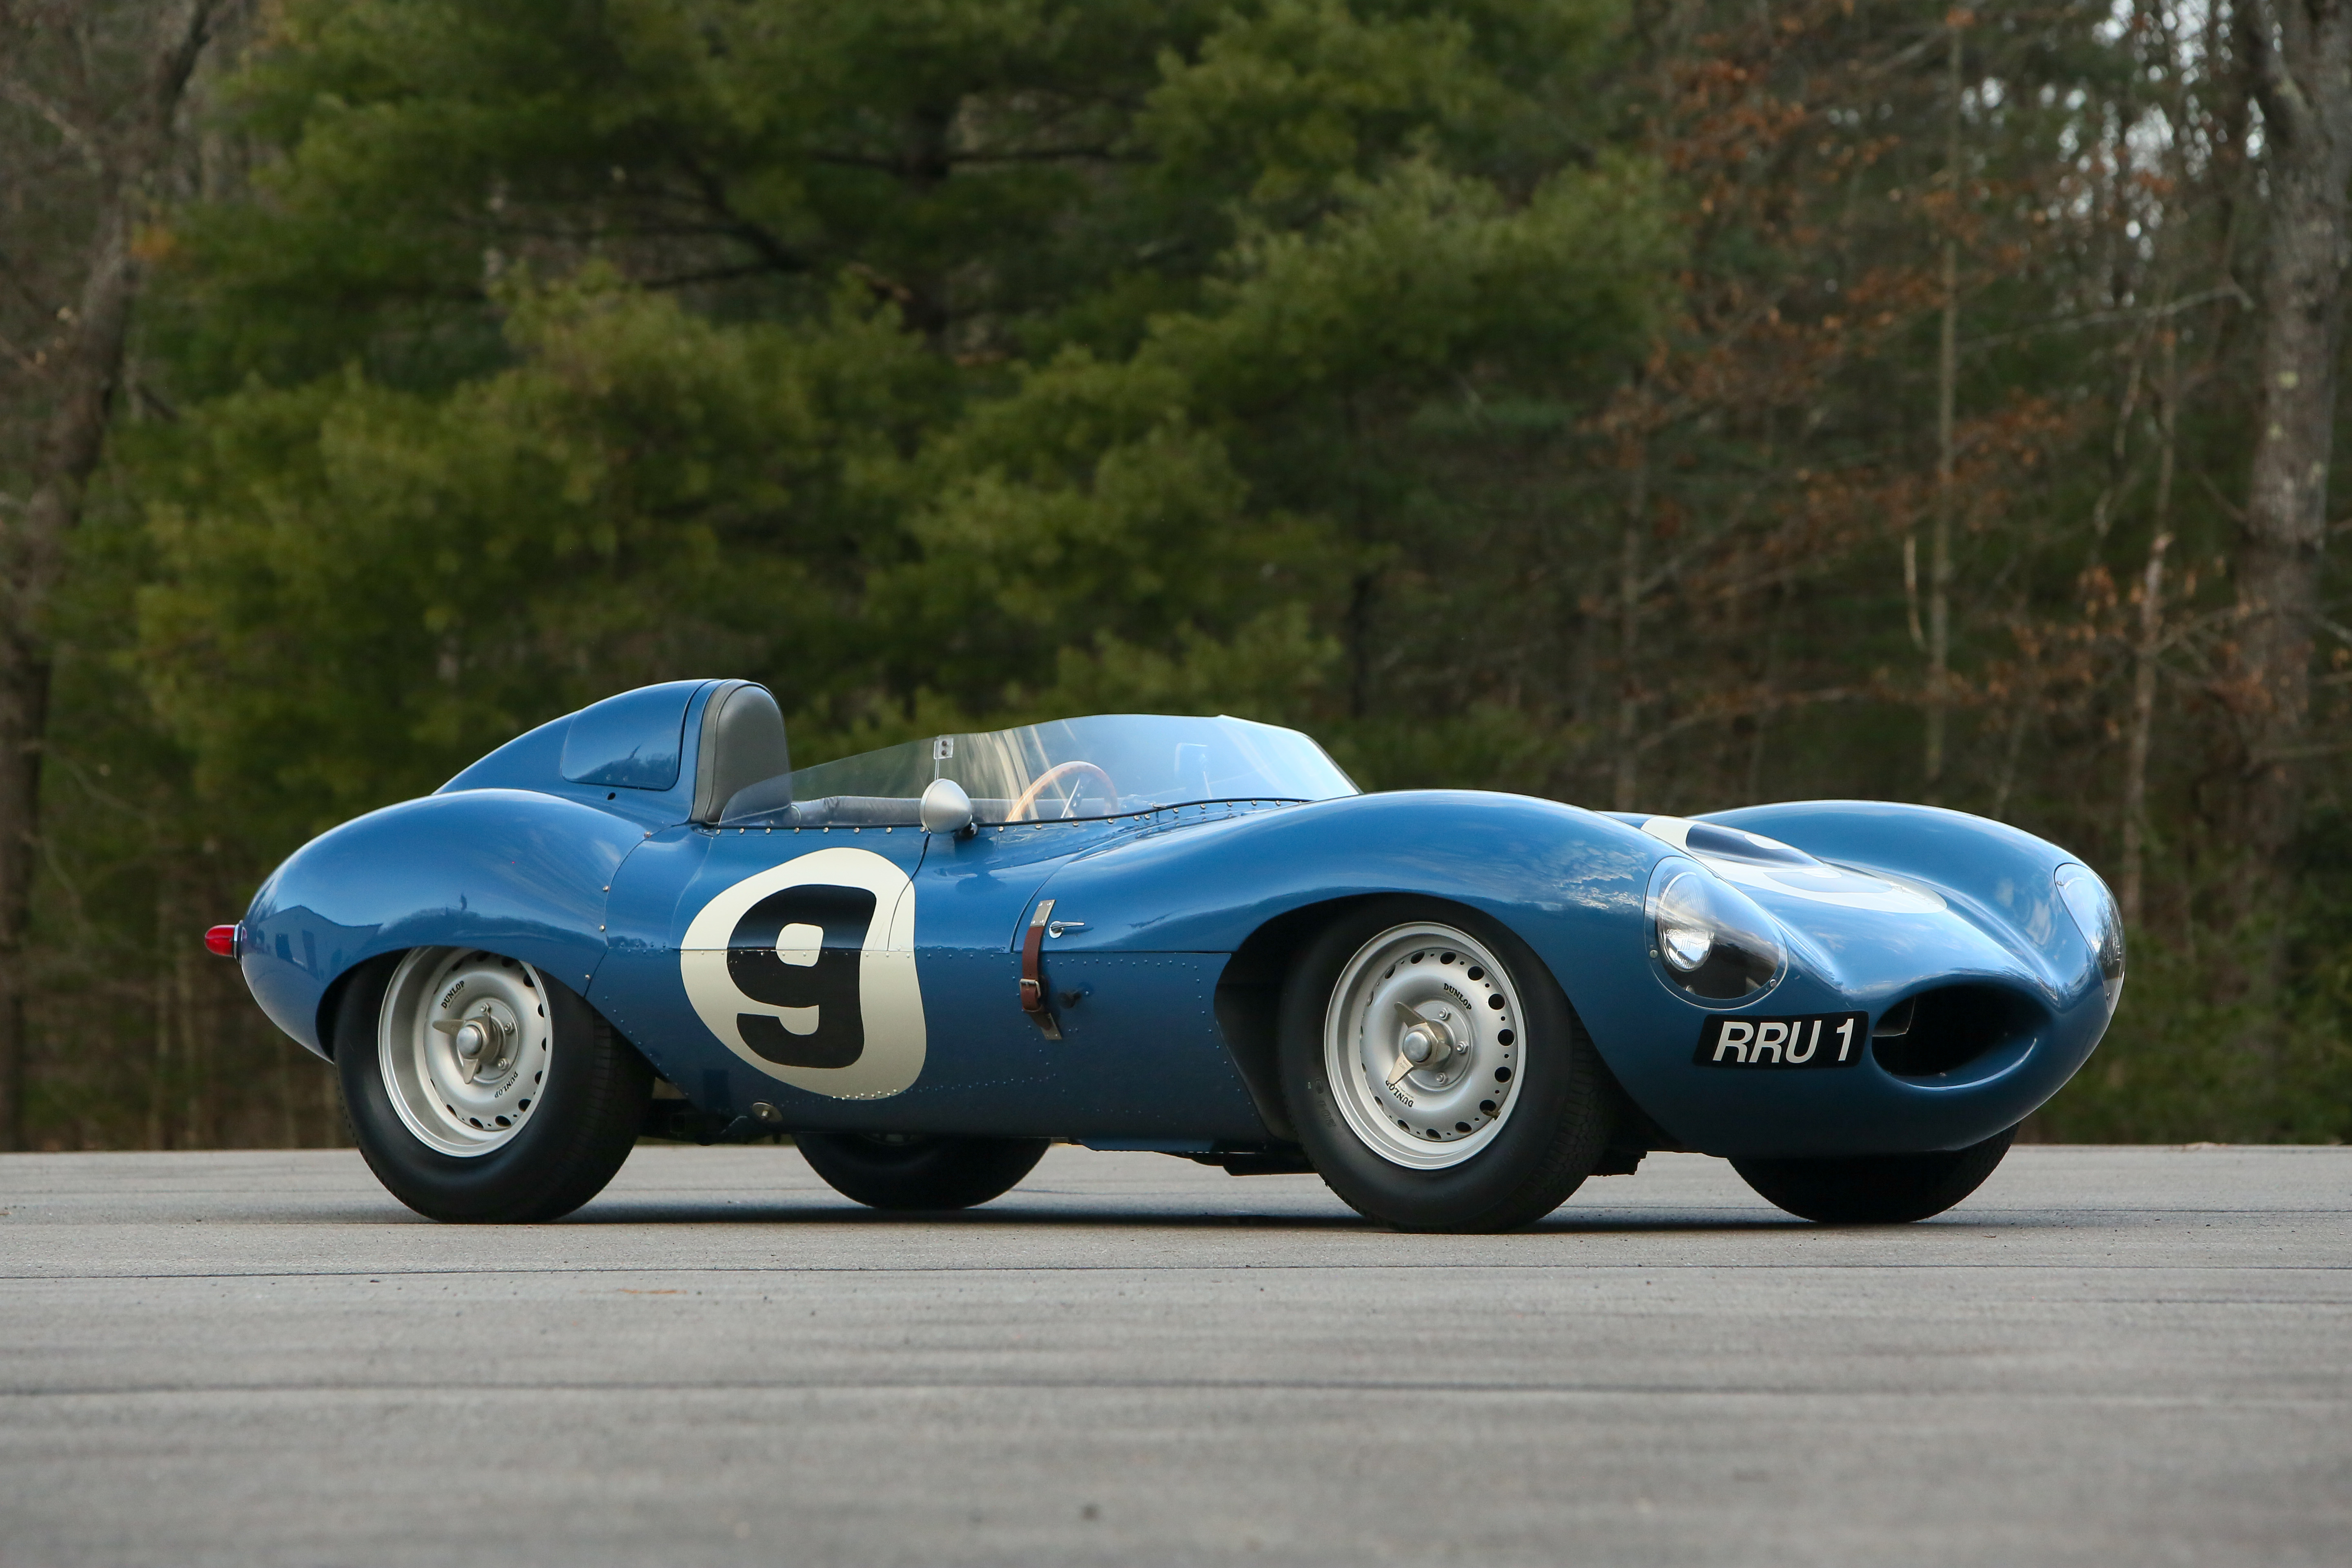 The Jim Taylor Car Collection Up For Auction